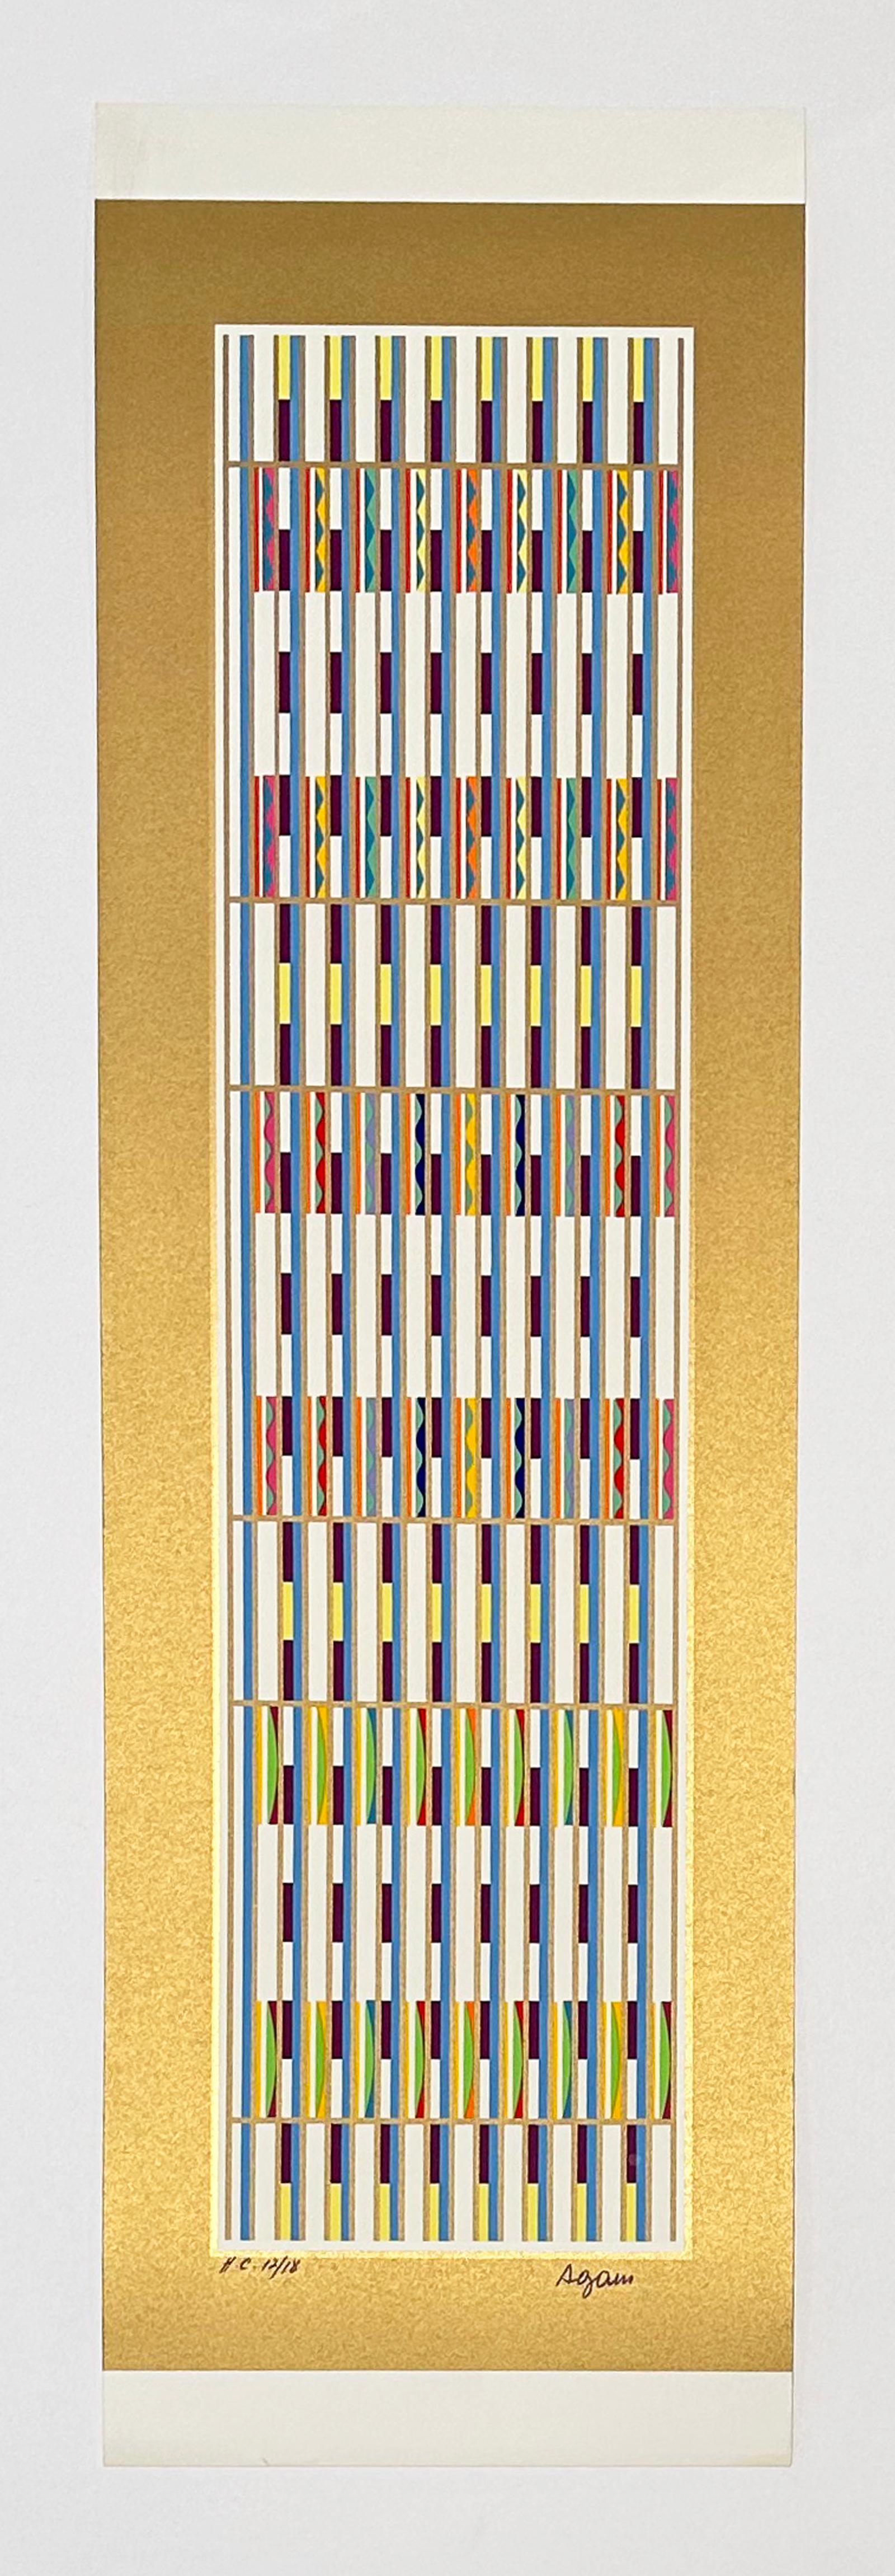 Untitled, from Vertical Orchestration - Print by Yaacov Agam